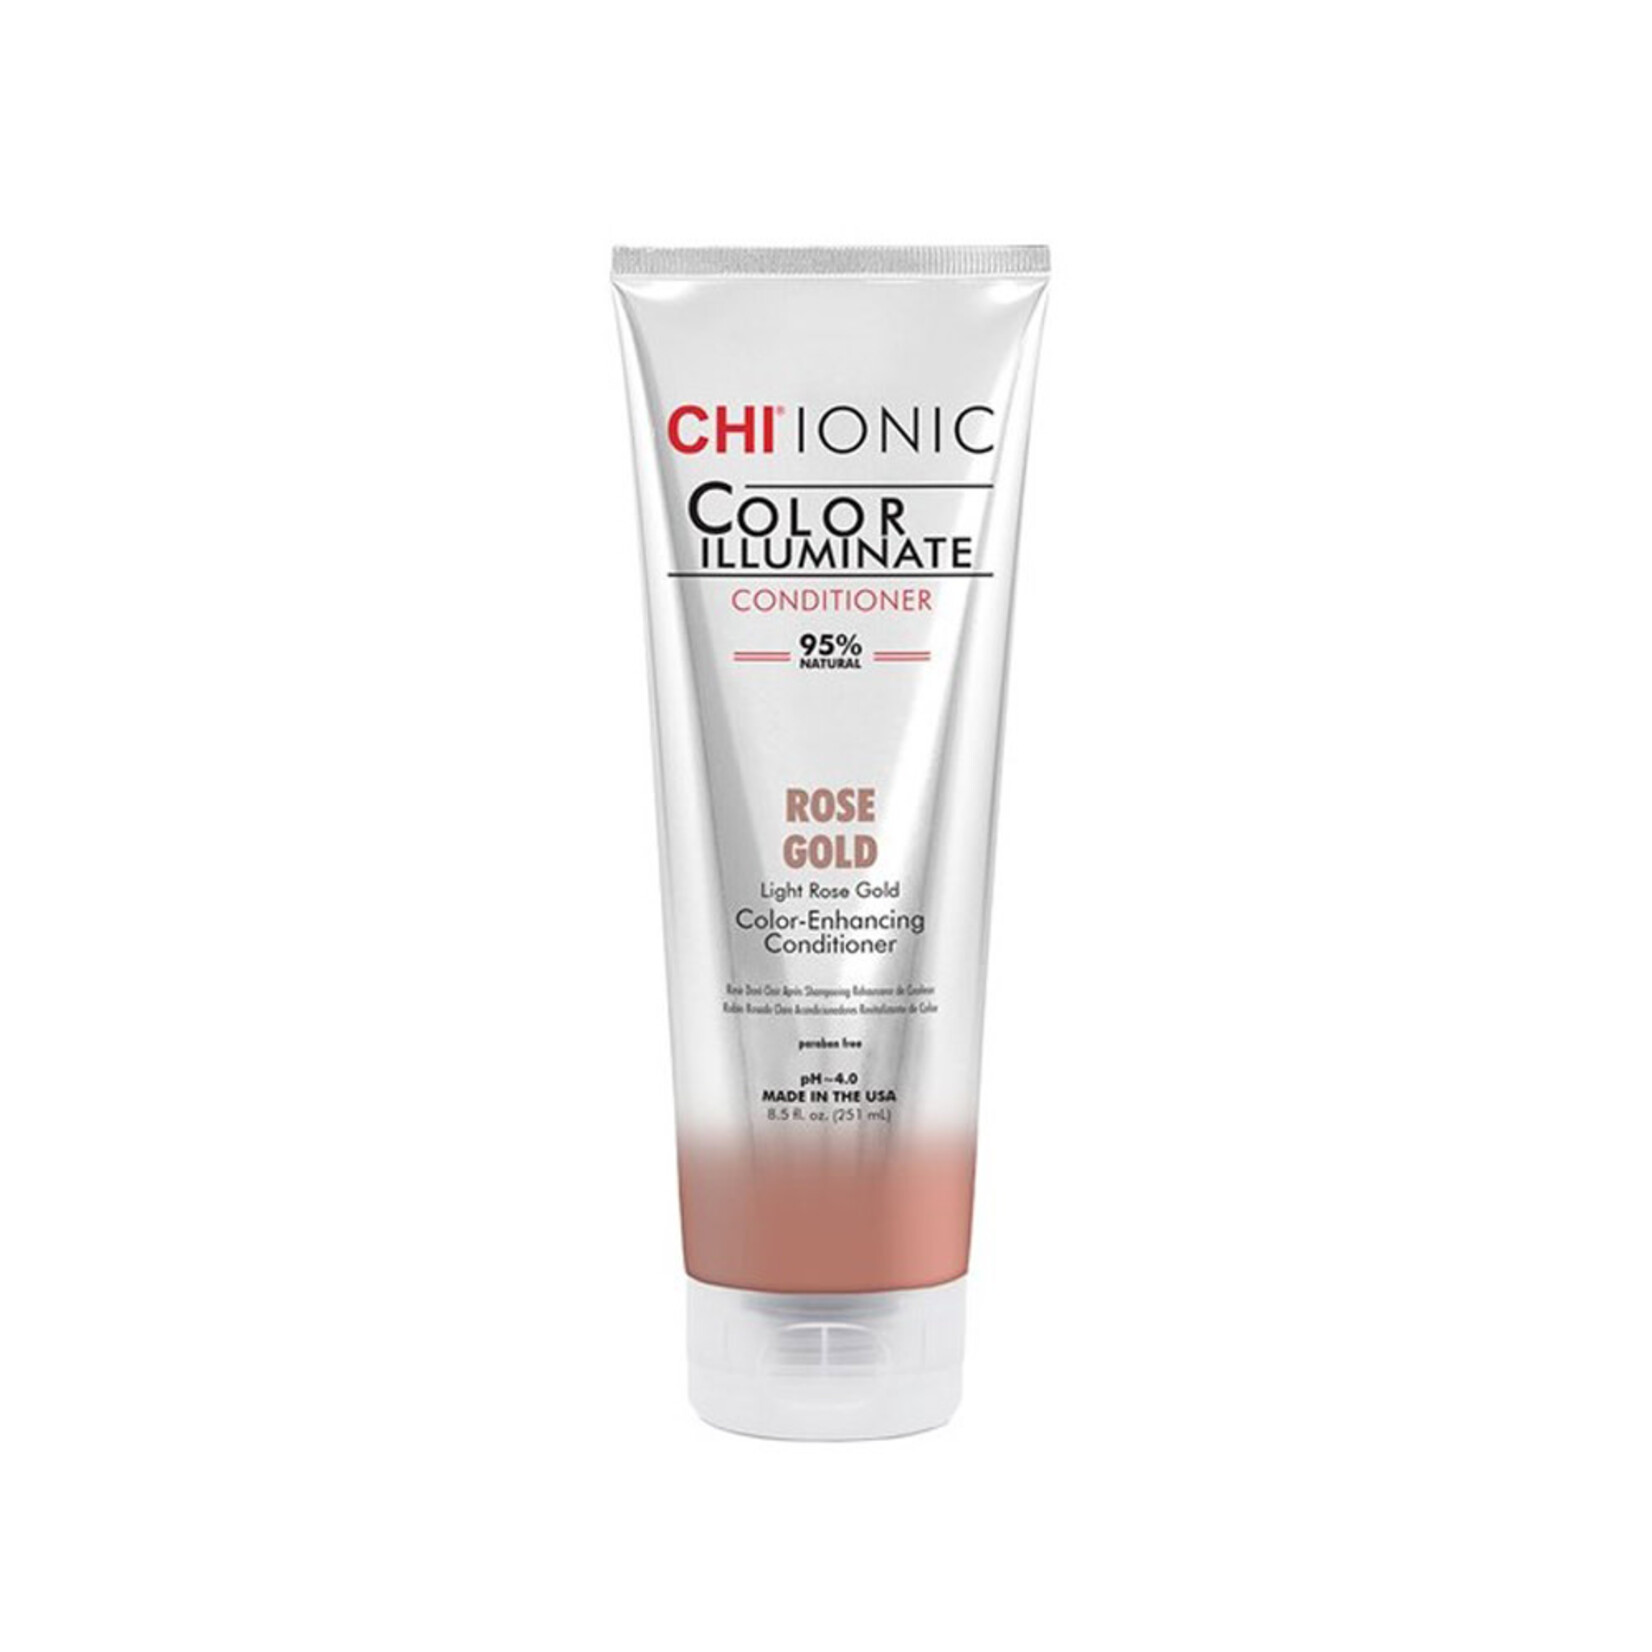 Chi CHI Ionic - Color enhancing conditioner light rose gold 251ml